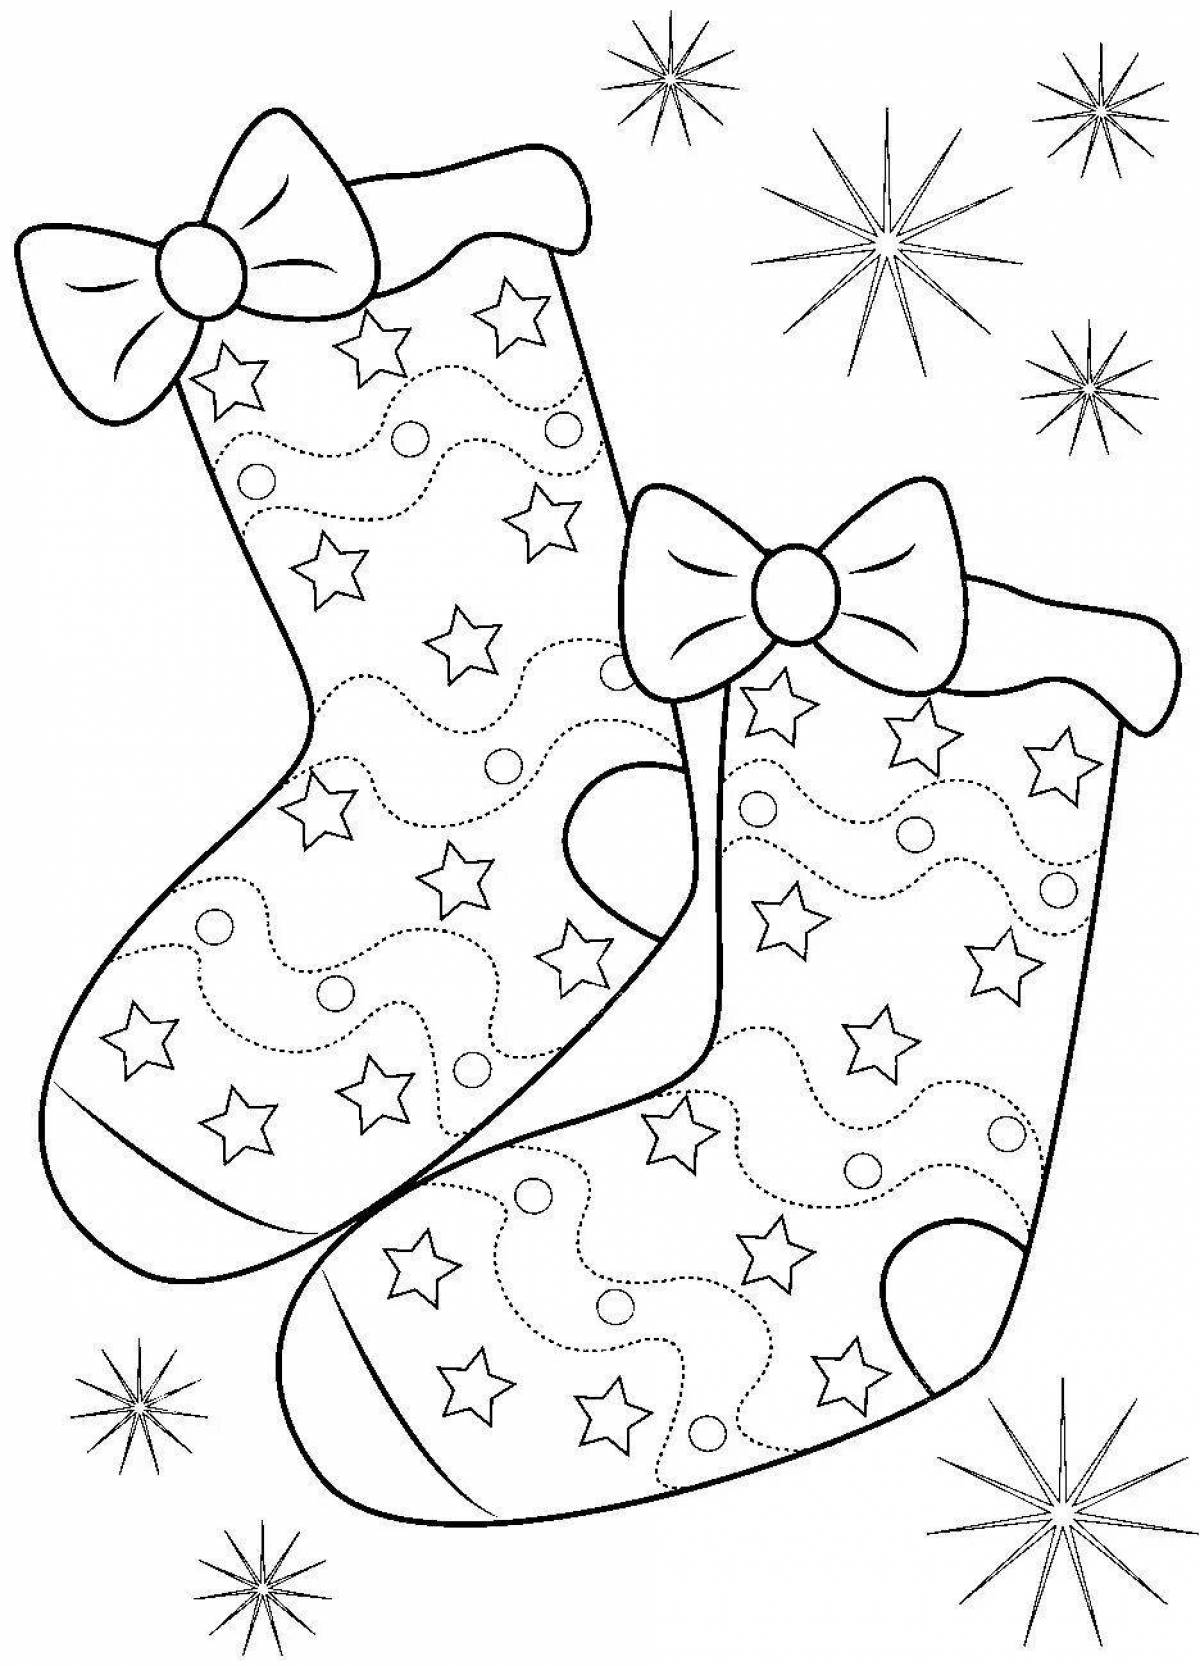 Colorful socks coloring for children